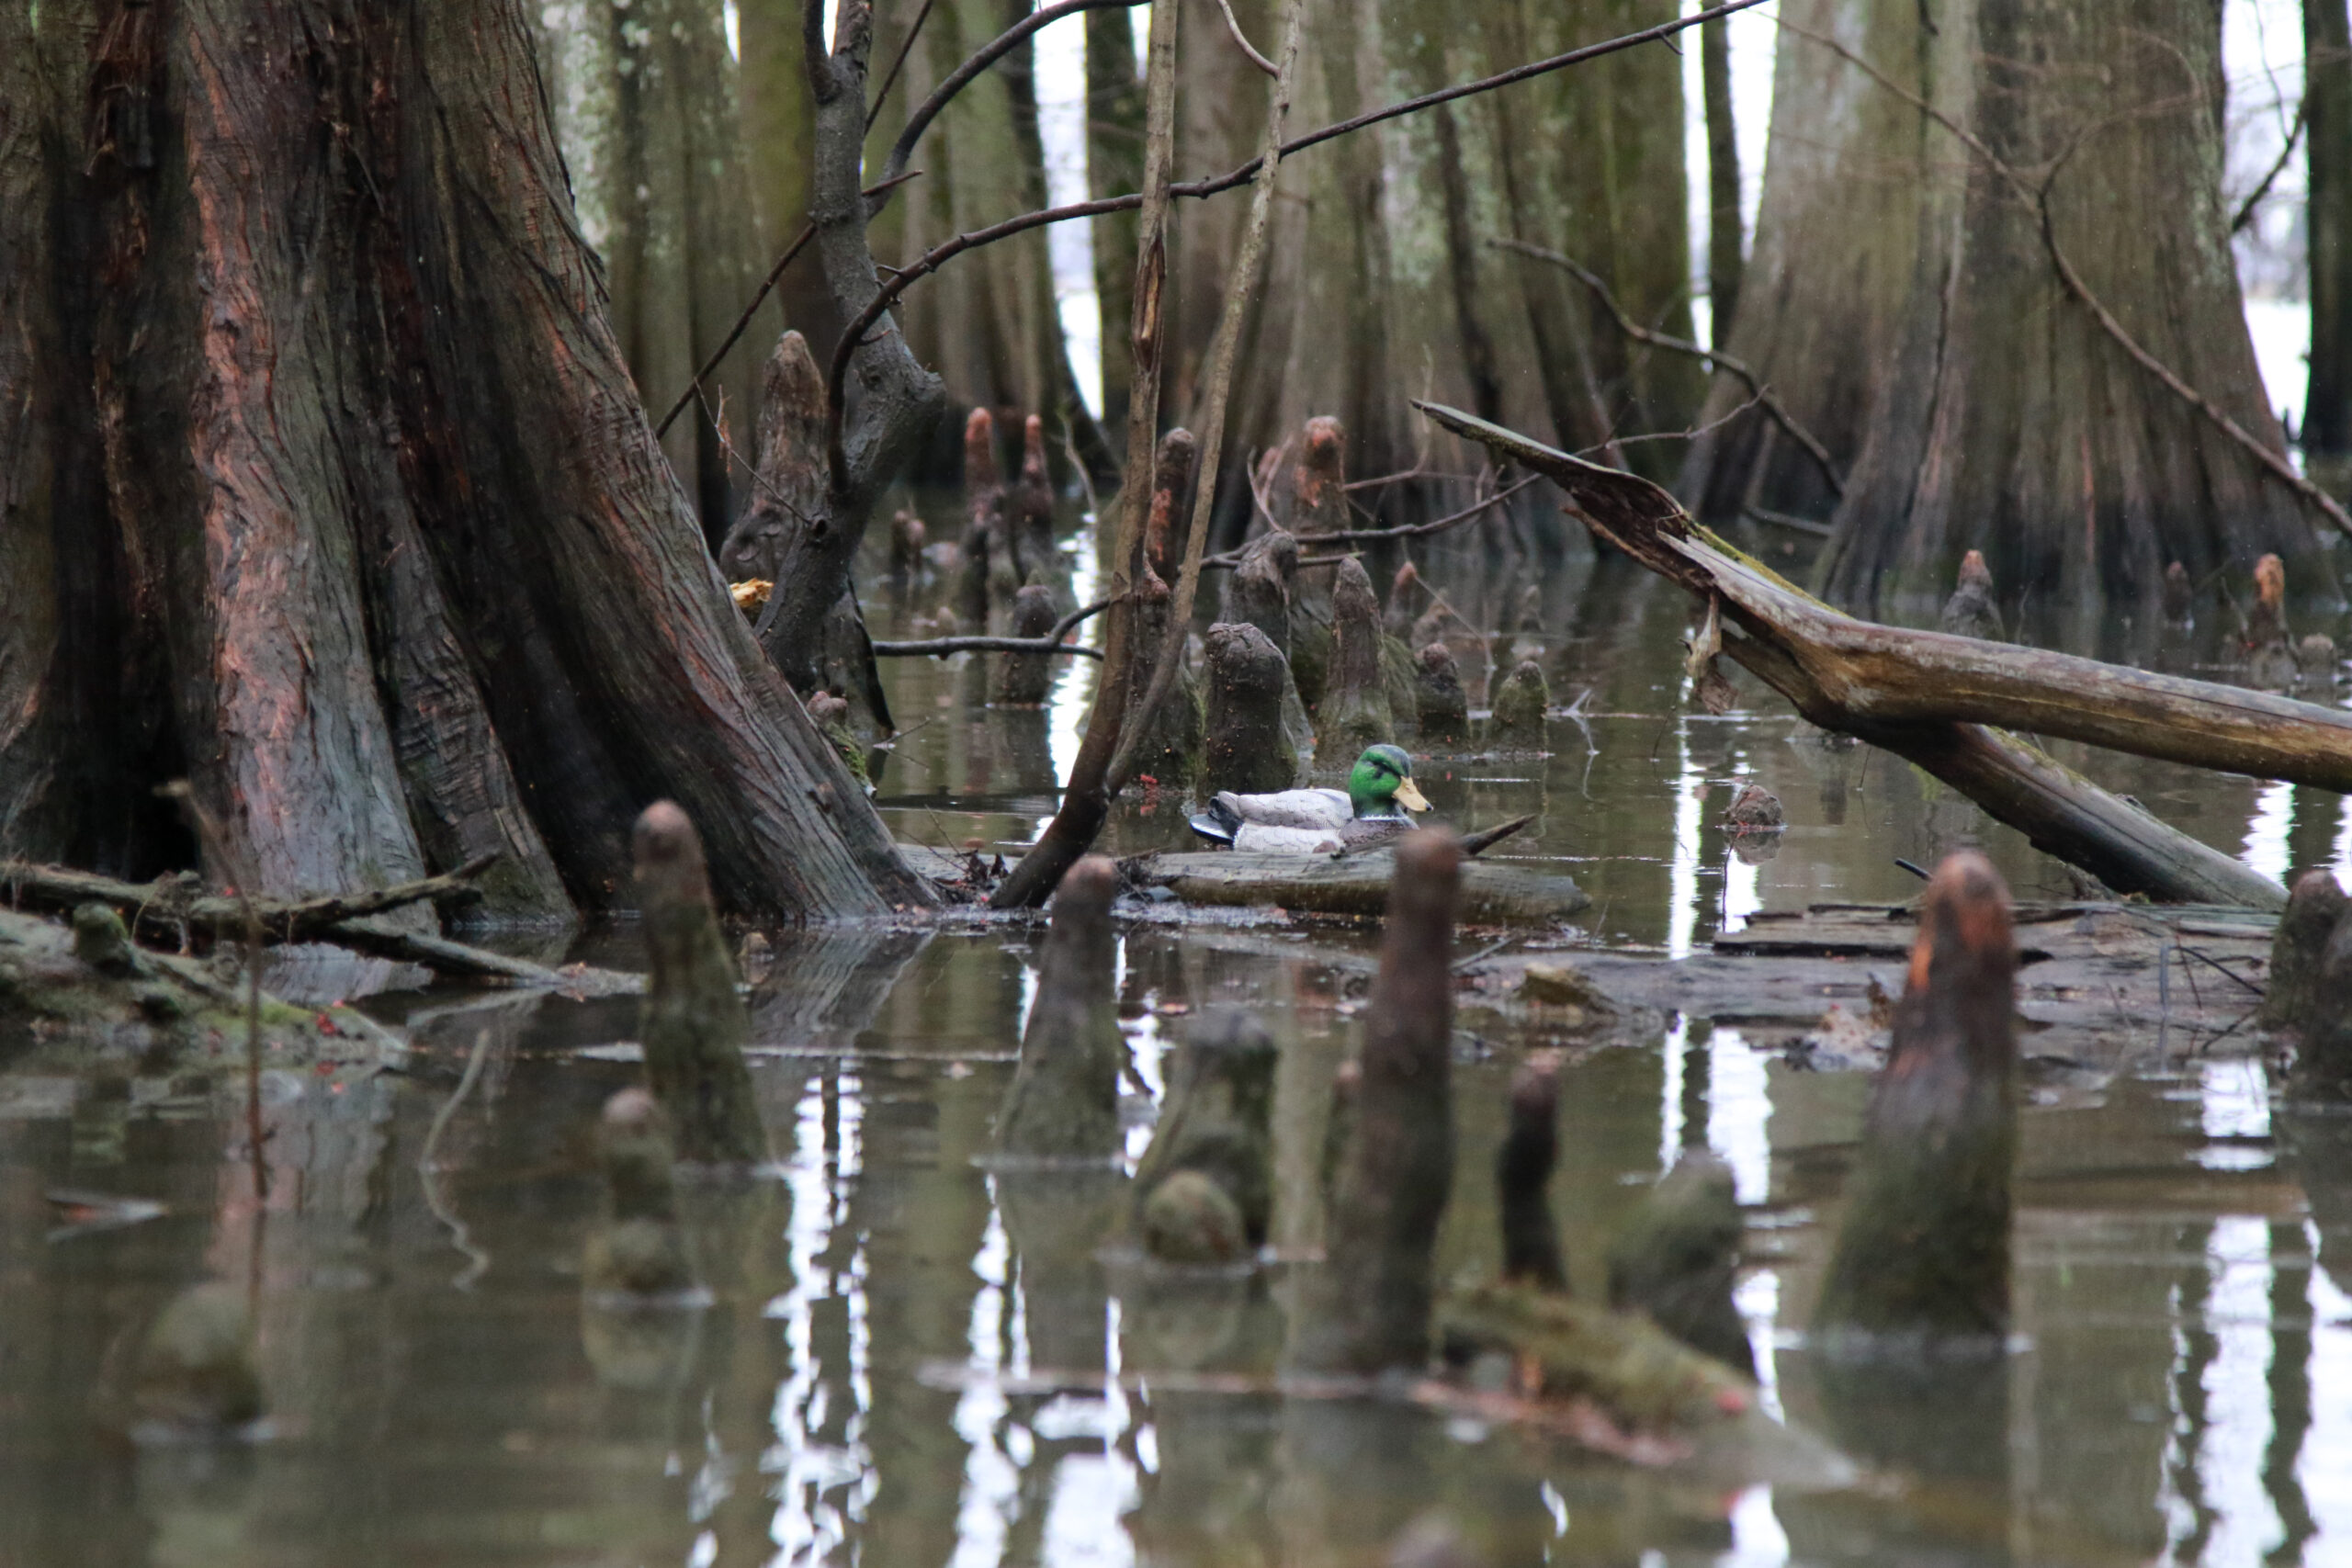 A lose decoy on Reelfoot Lake, which hunters were looking for when they found David Vowell.